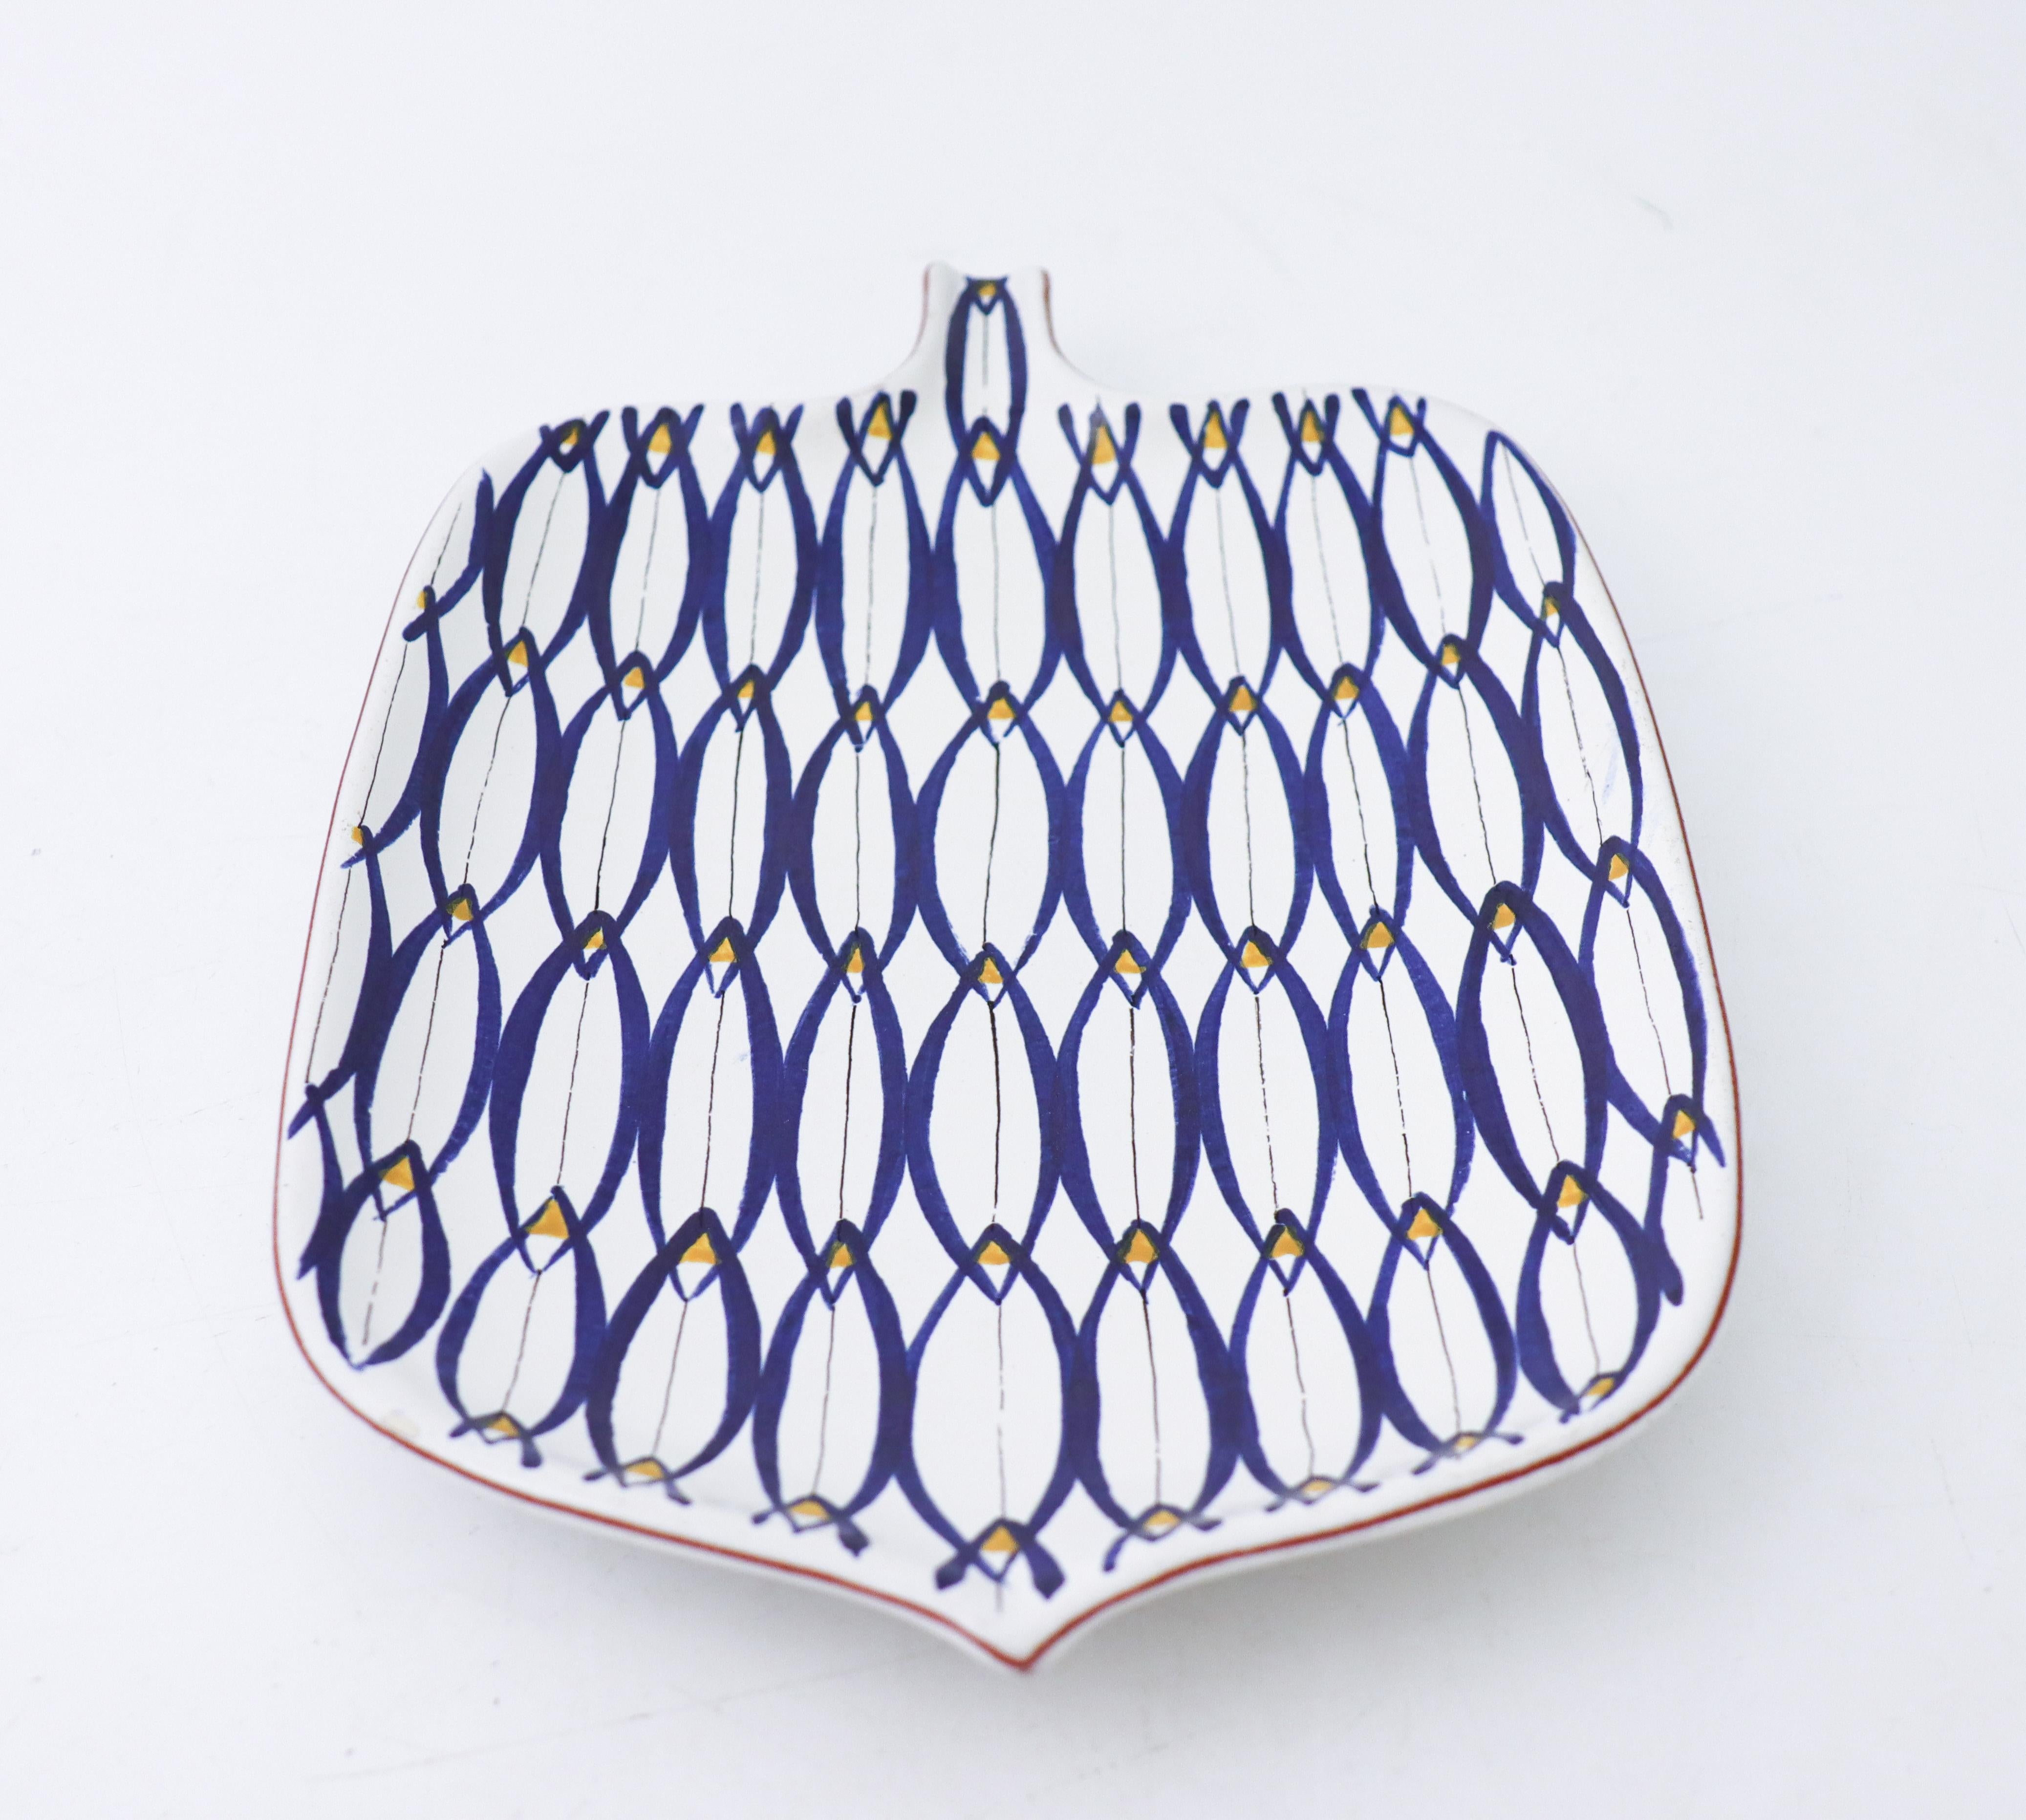 A serving dish in faience designed by Stig Lindberg at Gustavsbergs Studio in Stockholm, it is 30.5 x 20 cm (12.2